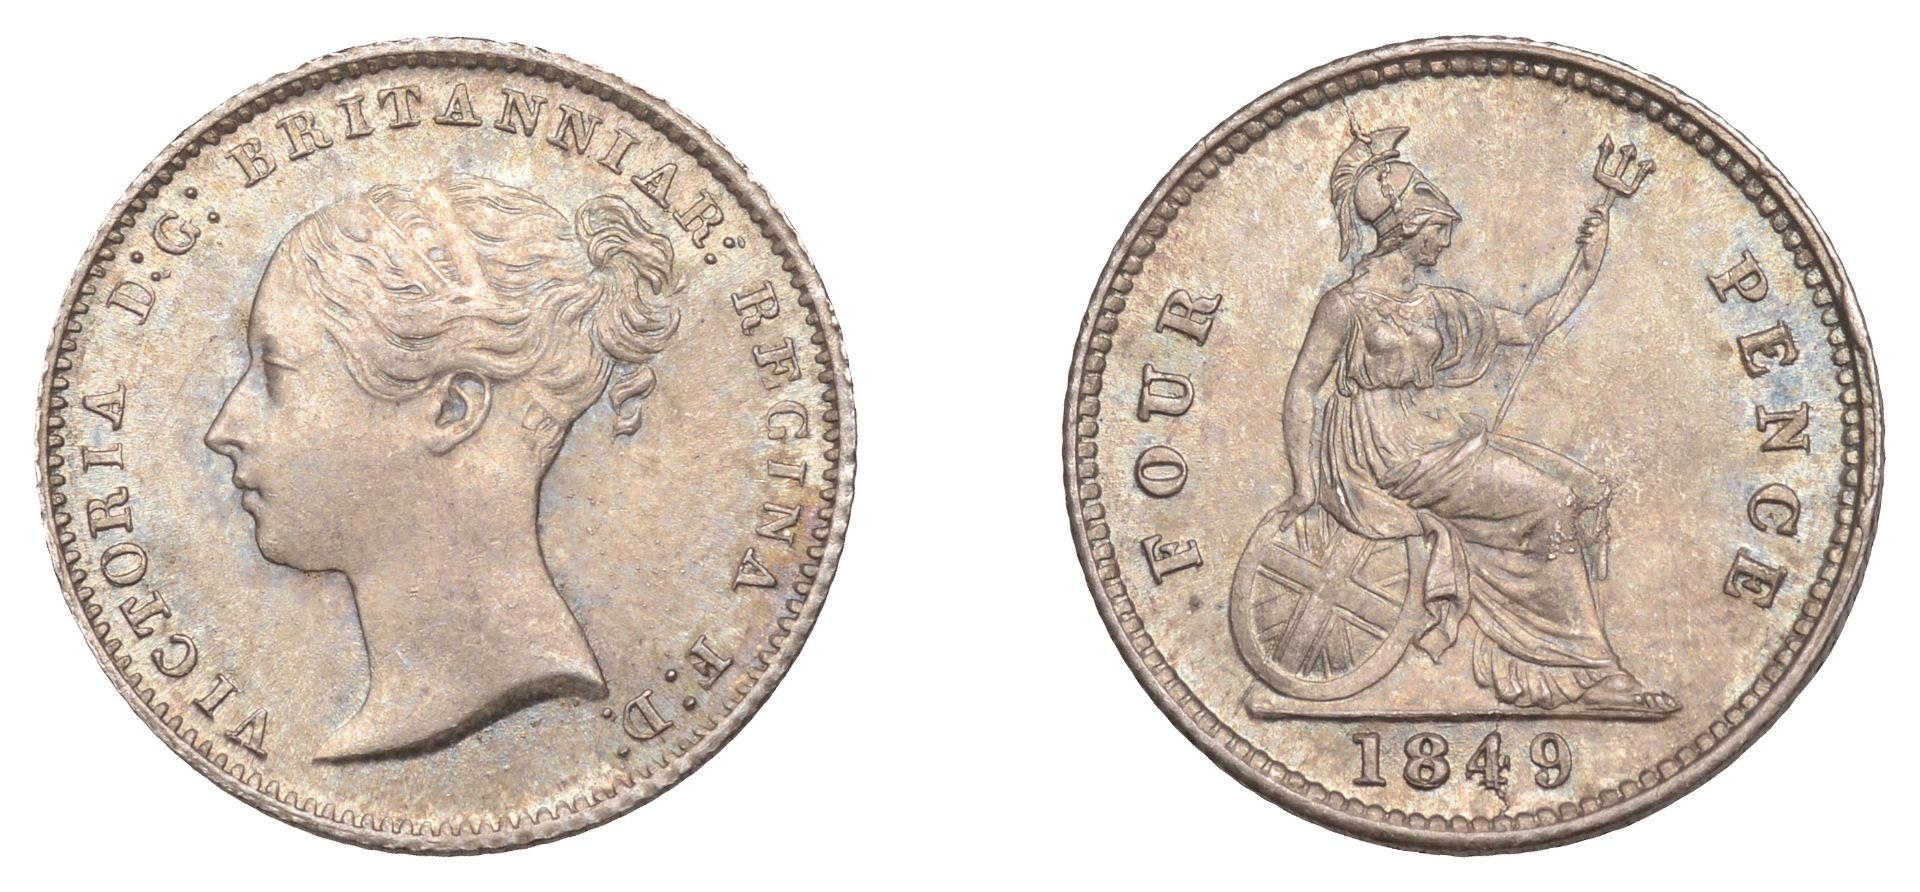 Victoria (1837-1901), Groat, 1849 (ESC 3343; S 3913). Extremely fine and toned Â£60-Â£80